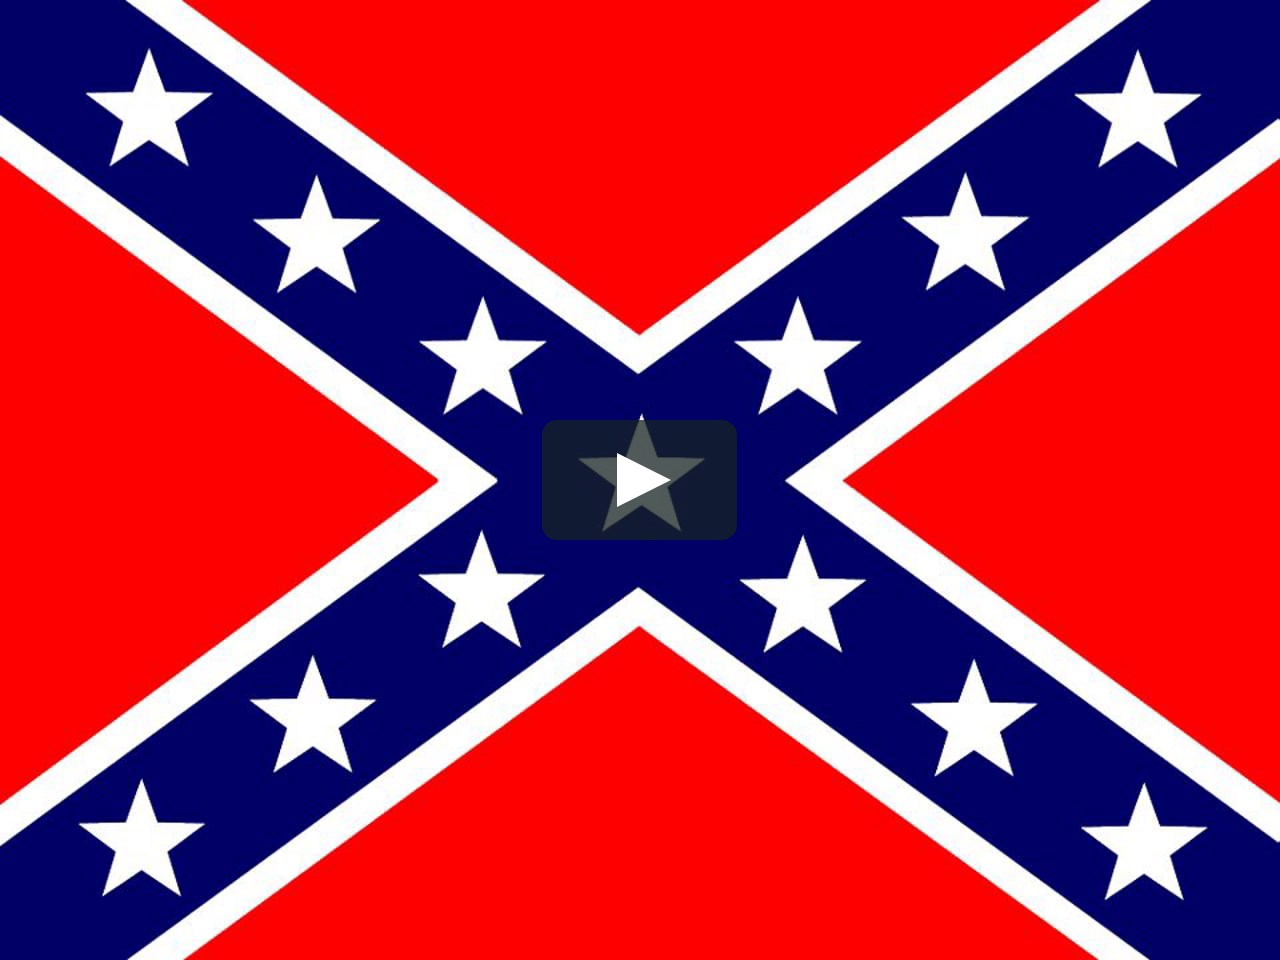 The South Will Rise Again On Vimeo